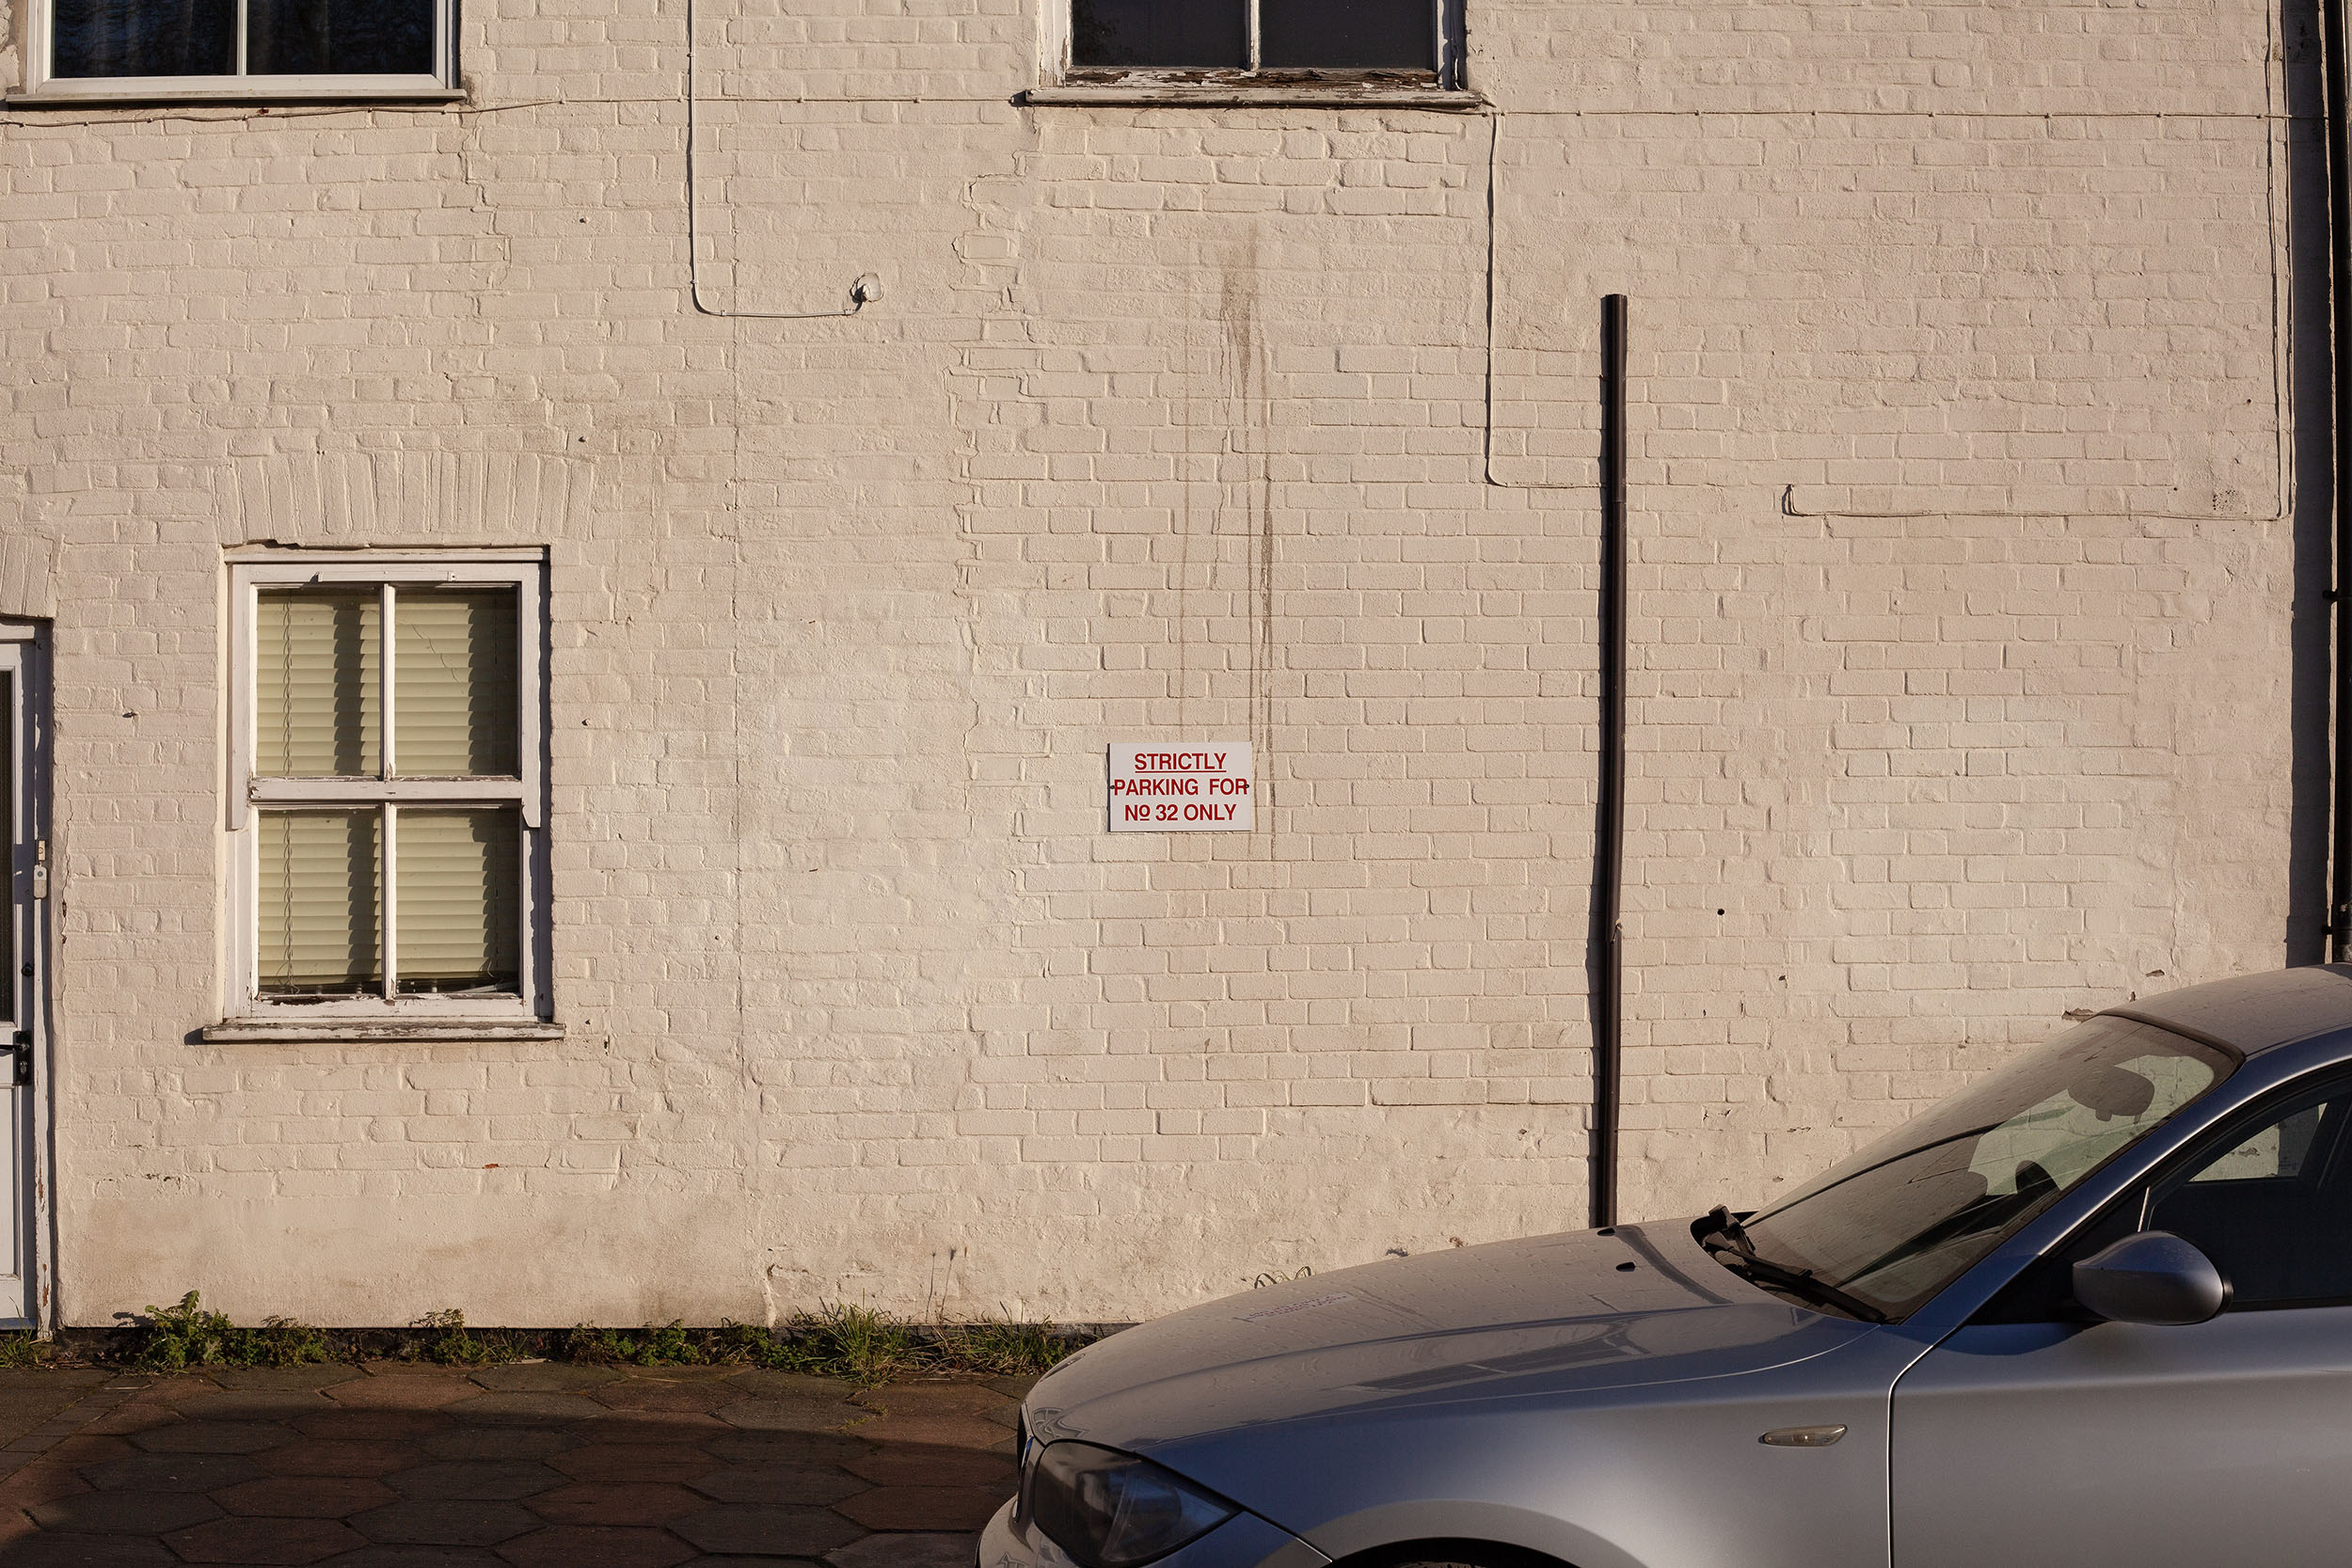 Photograph by Cerys Leahy depicting shadows and a car parked in-front of a strict parking sign.